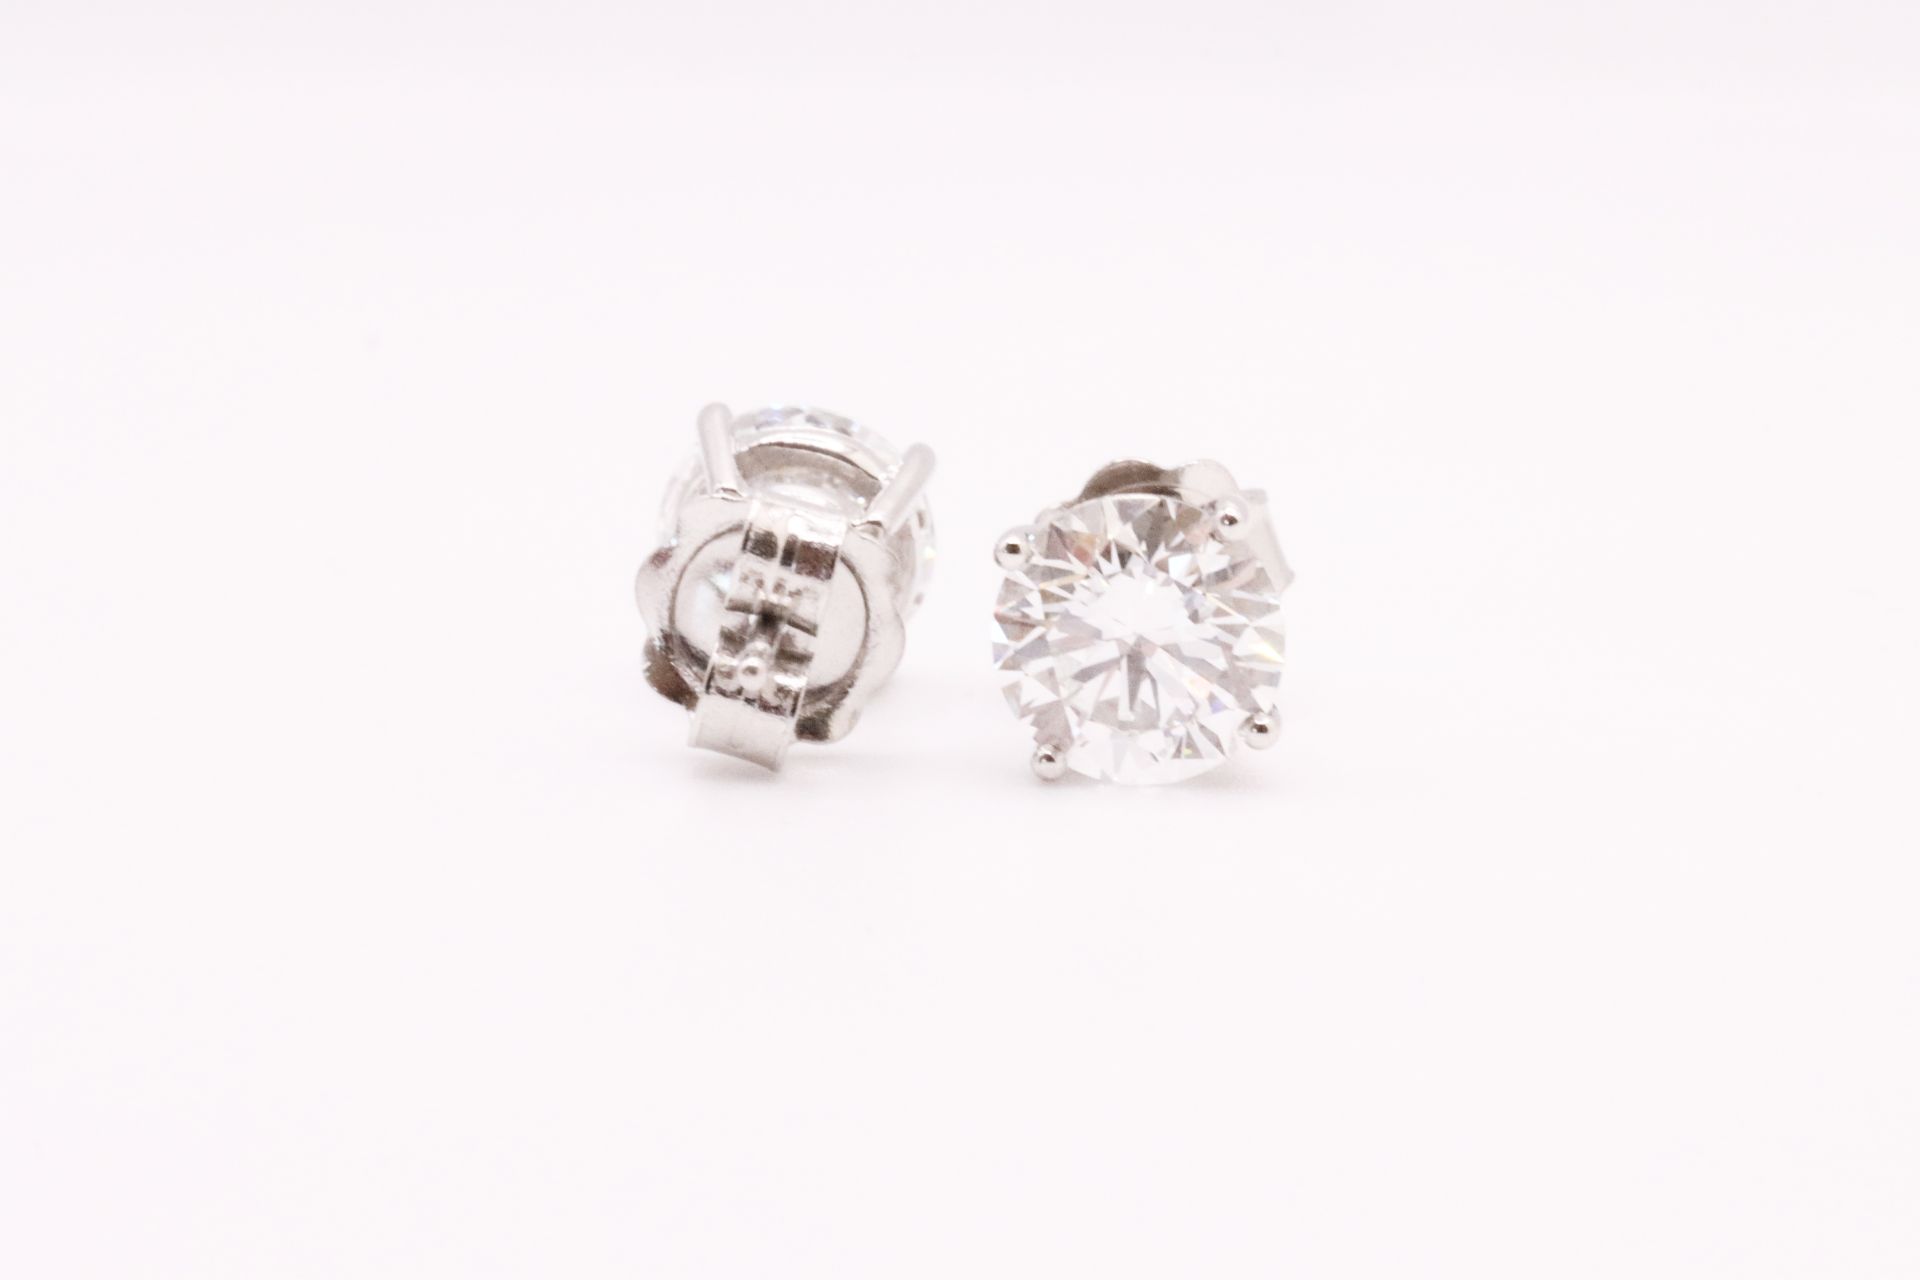 ** ON SALE ** Round Brilliant Cut 2.00 Carat Diamond Earrings Set in 18kt White Gold - F Colour VVS2 - Image 4 of 5